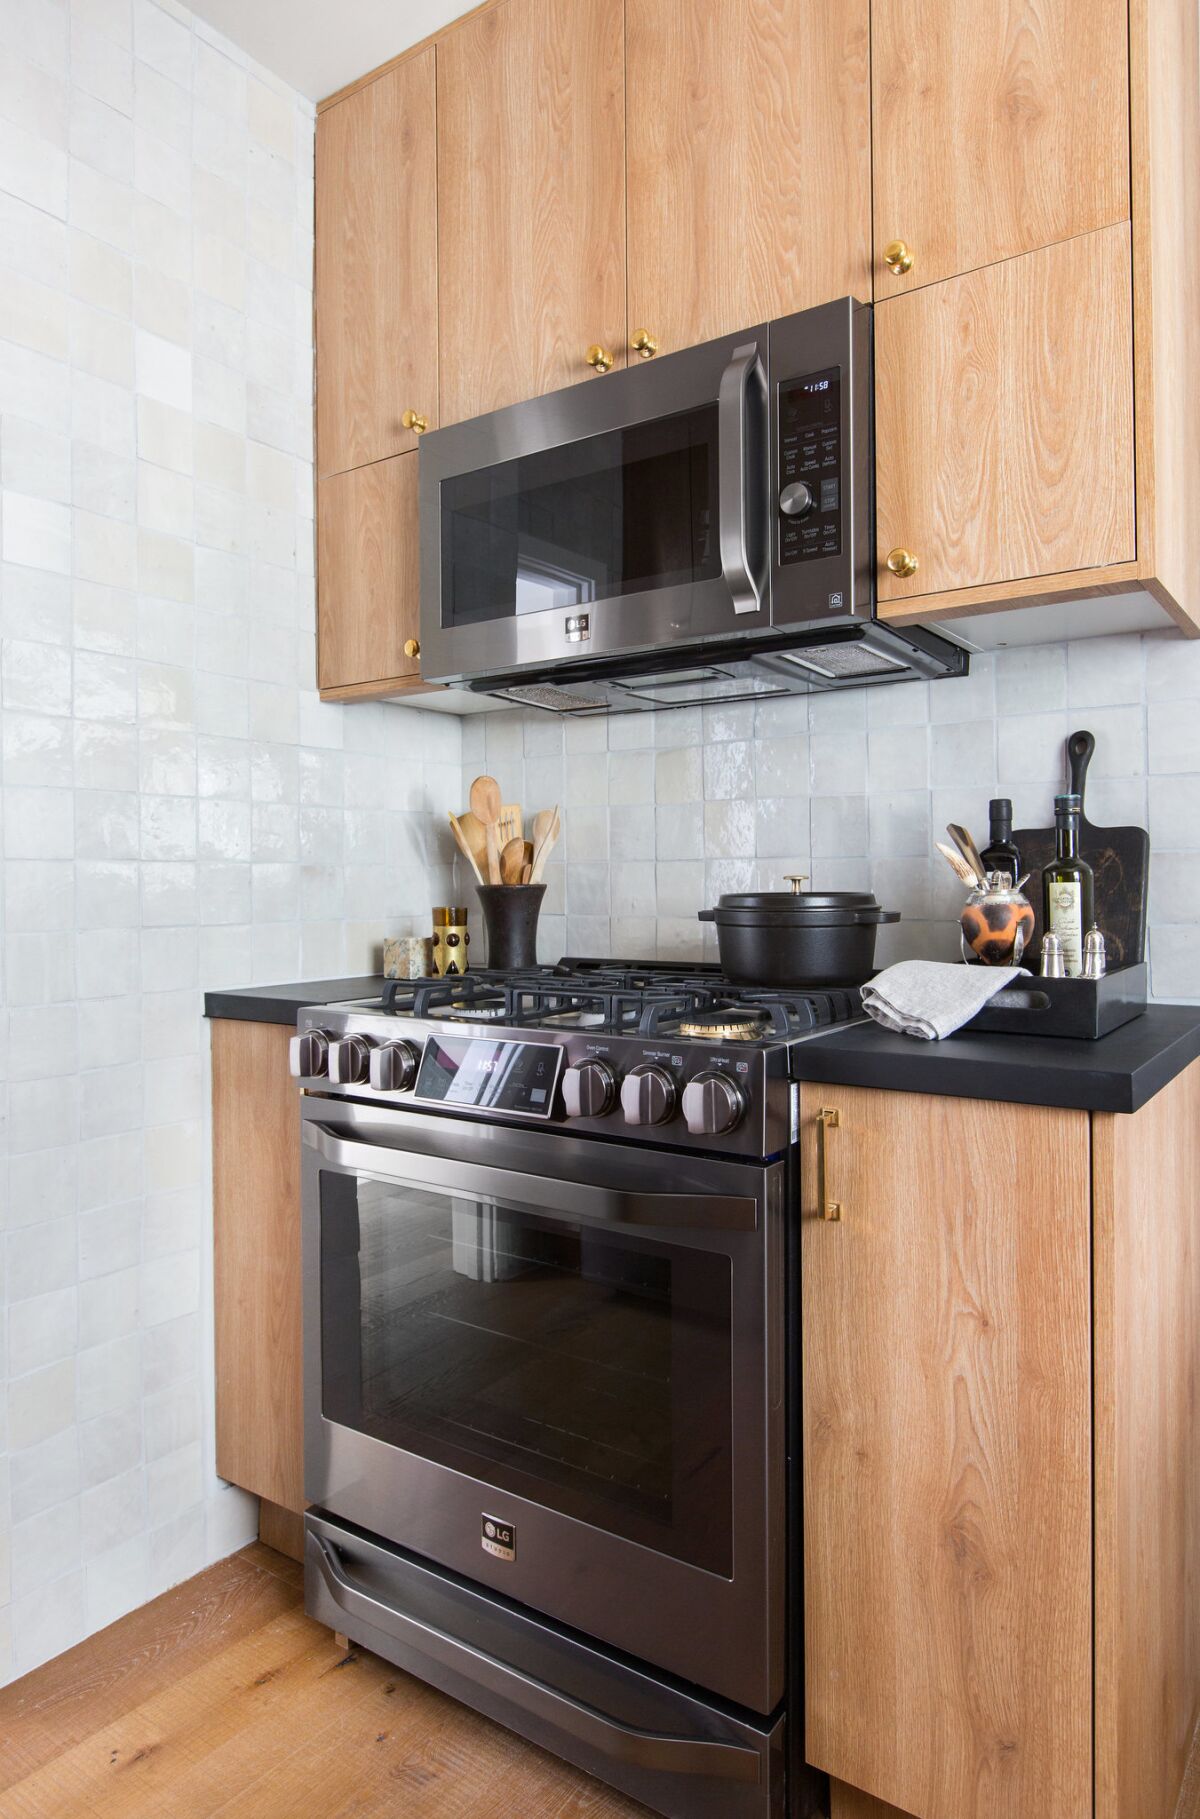 A recently renovated 80 square foot kitchen, in the Carriage House of Nate Berkus' LA home.